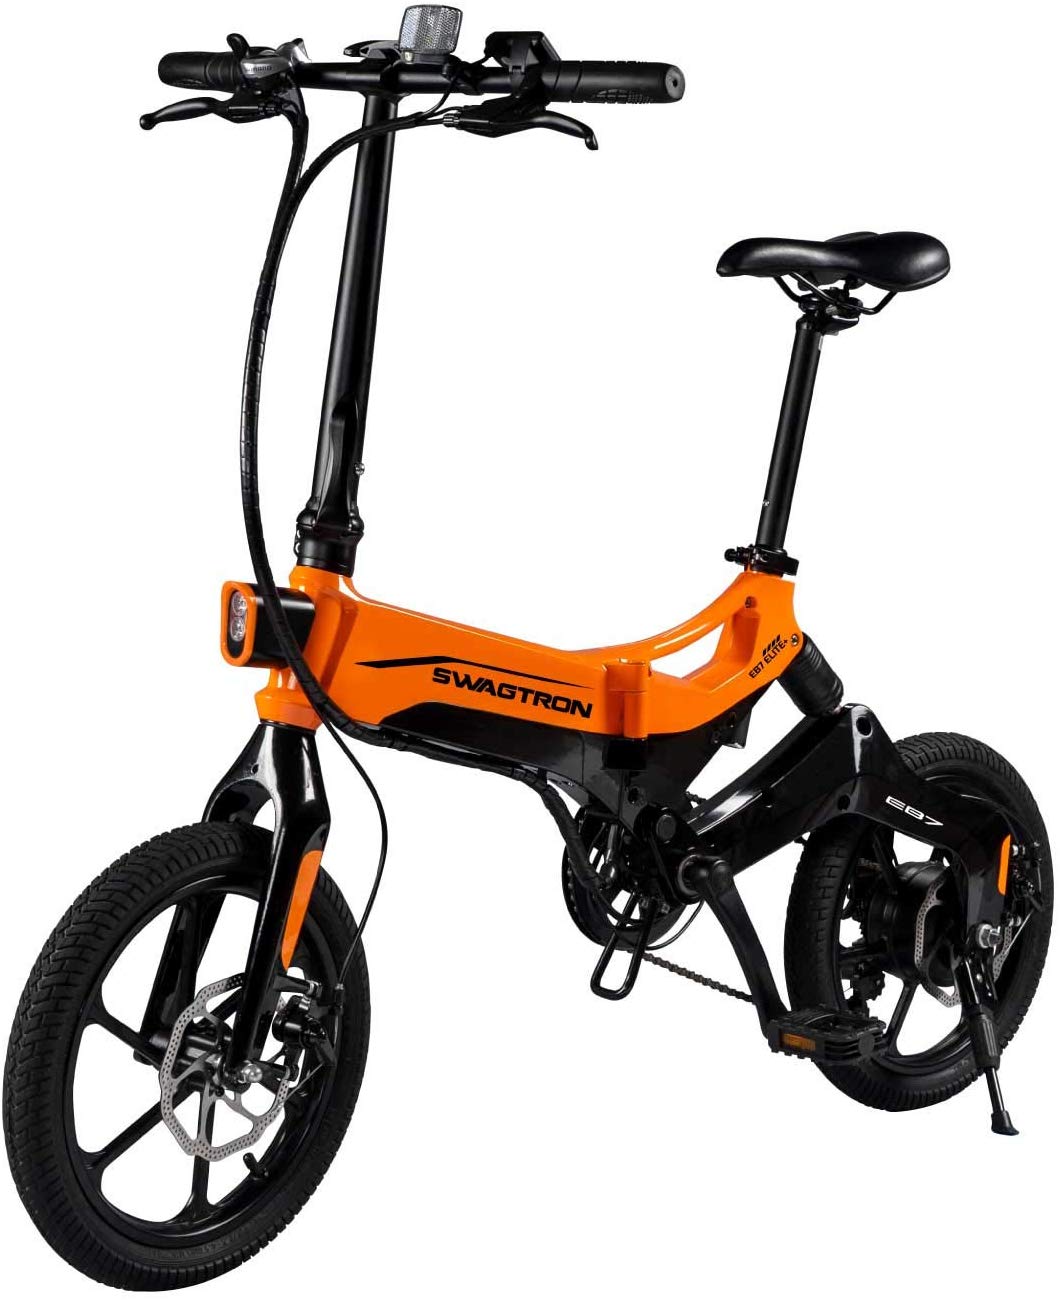 EB7 Plus Folding Electric Bike Quick-Shift Shimano 7-Speed Find Cheapest Online Prices